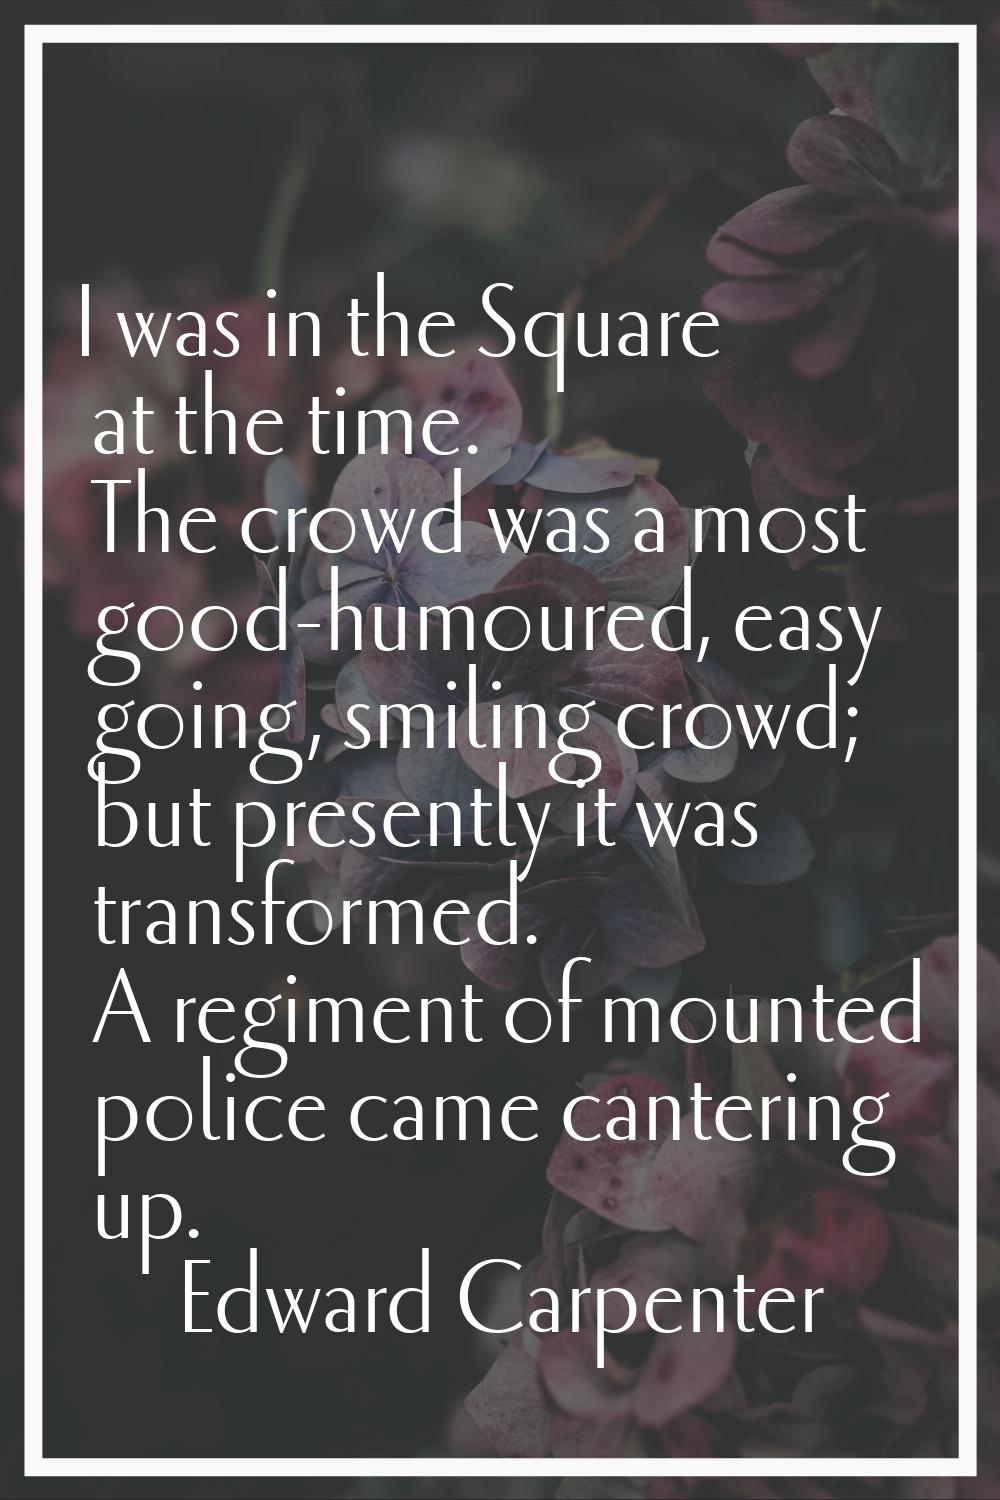 I was in the Square at the time. The crowd was a most good-humoured, easy going, smiling crowd; but